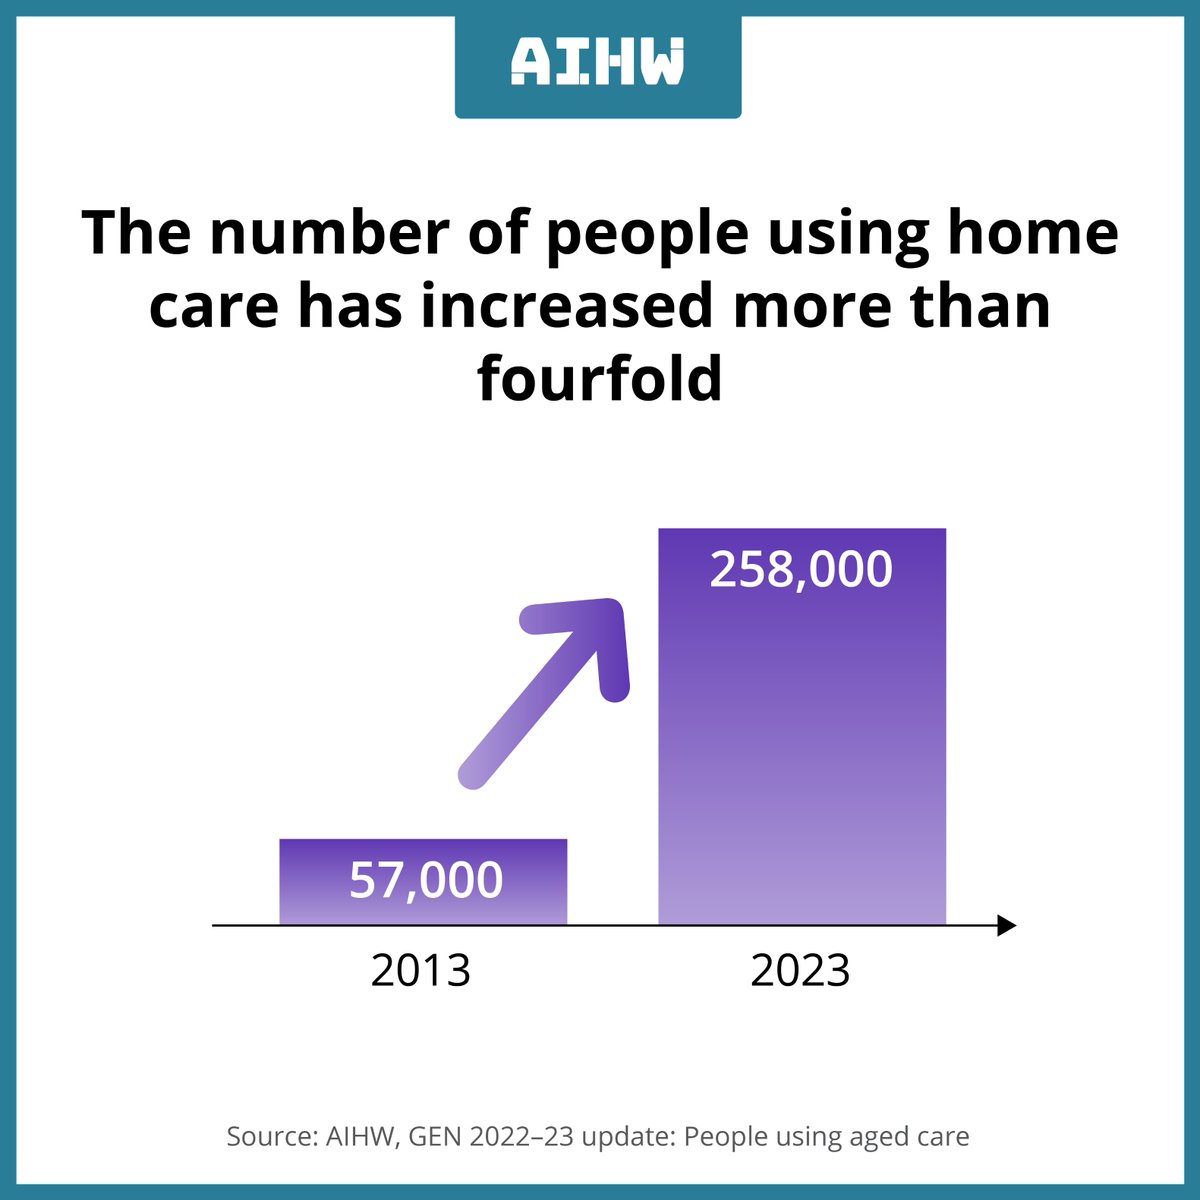 The number of people using home care has increased more than fourfold over the 10-year period from 2013 to 2023. See more brnw.ch/21wJwDv #agedcare #homecare